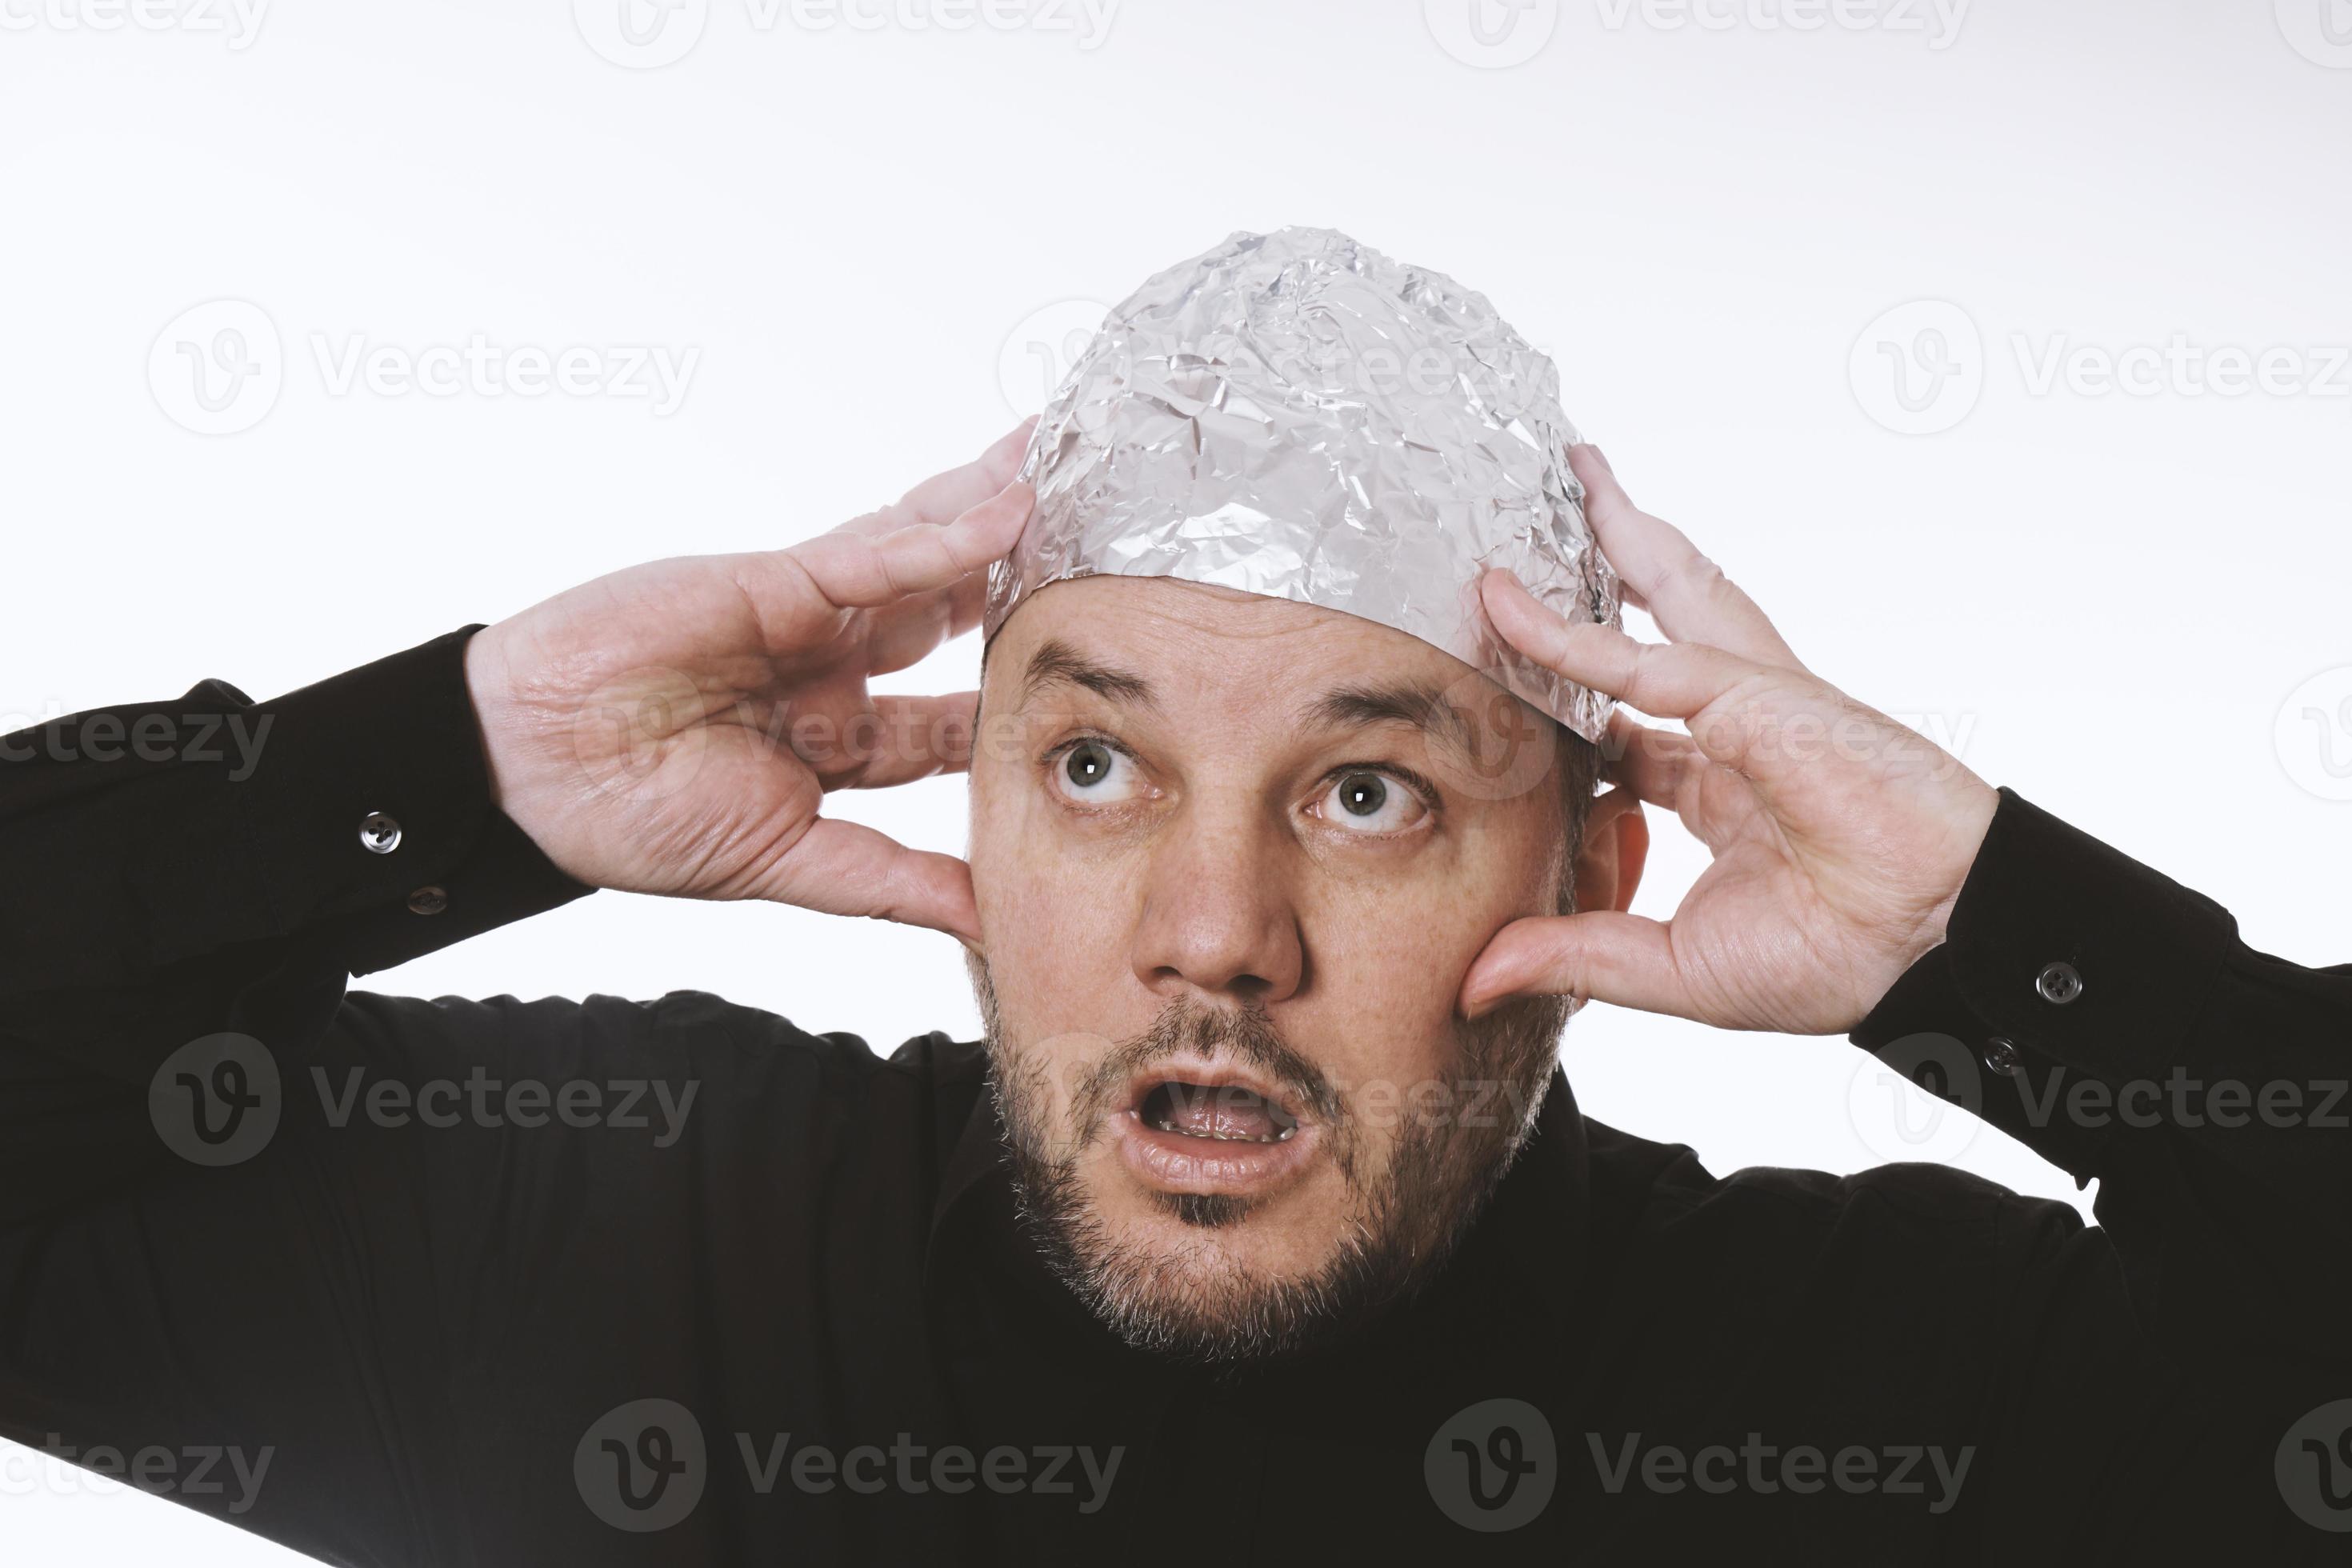 https://static.vecteezy.com/system/resources/previews/005/913/178/large_2x/paranoid-man-wearing-tin-foil-hat-photo.jpg